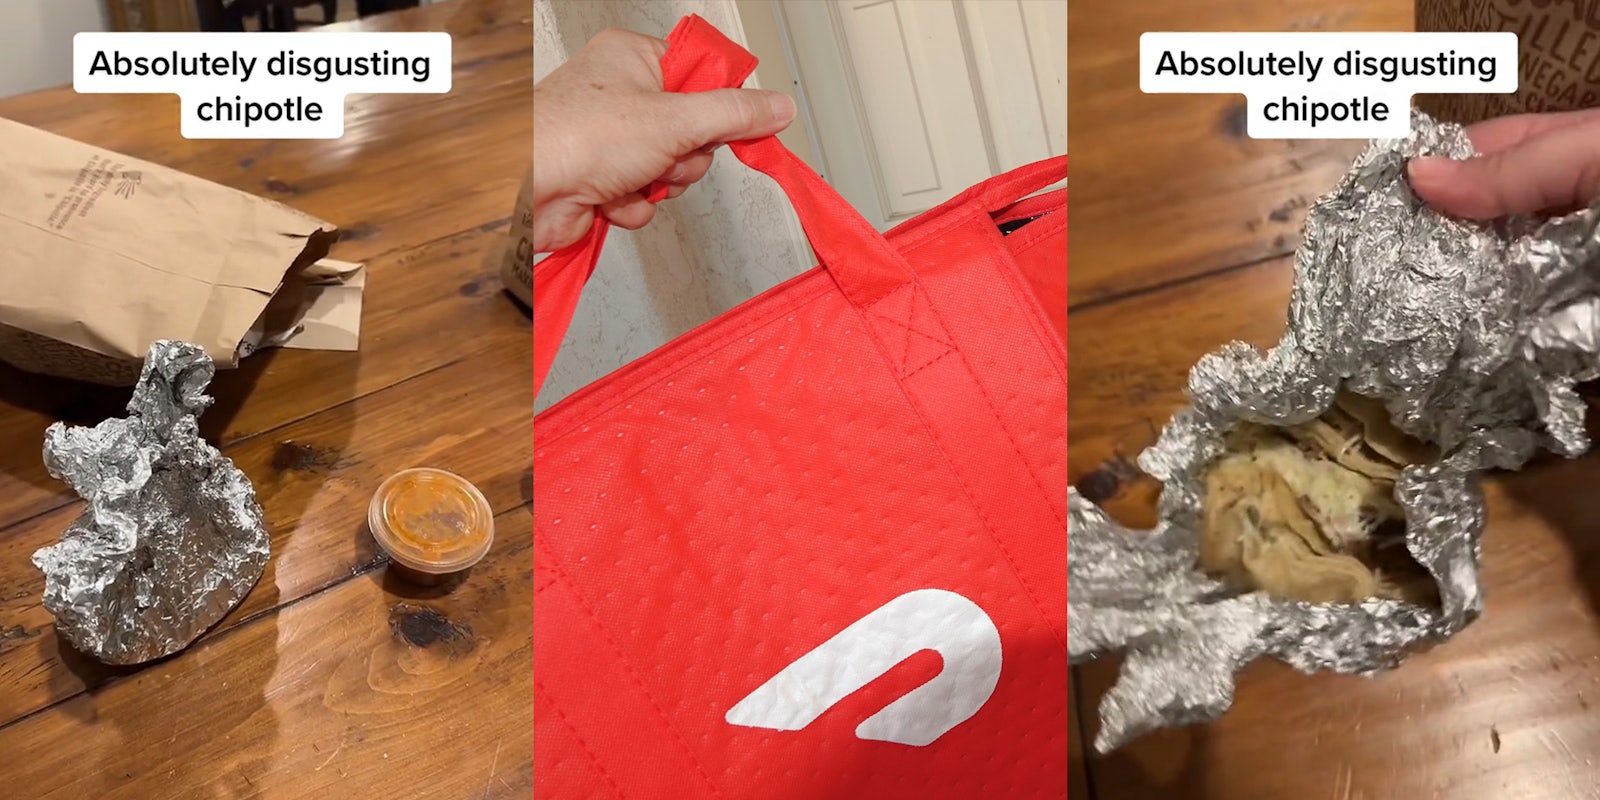 Chipotle DoorDash order food on table with caption 'Absolutely disgusting chipotle' (l) DoorDash branded bag in worker's hand in front of white door (c) Chipotle DoorDash order food on table with caption 'Absolutely disgusting chipotle' (r)